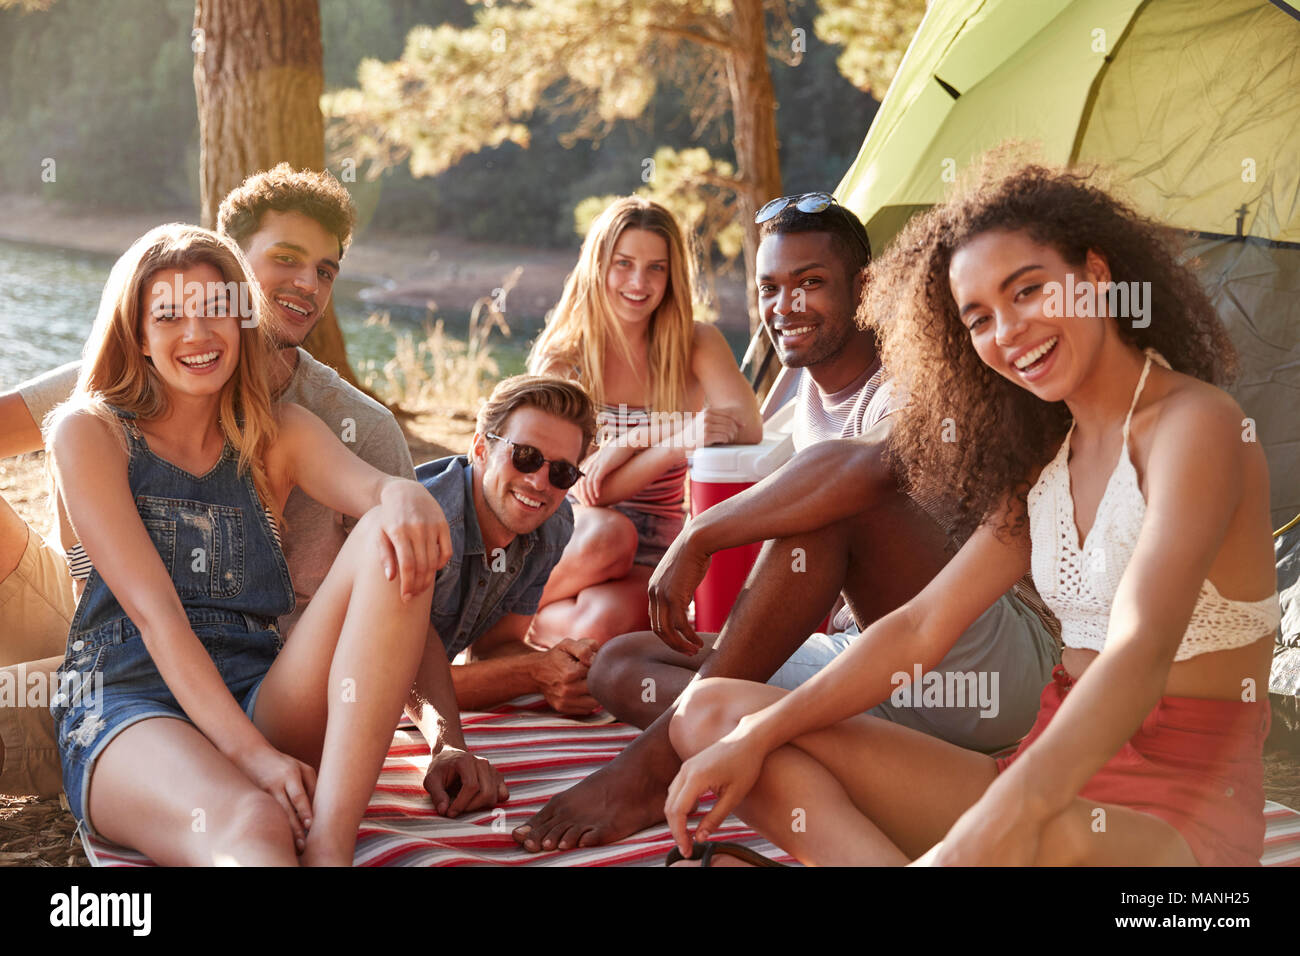 Friends relaxing on a blanket by a lake, close up Stock Photo